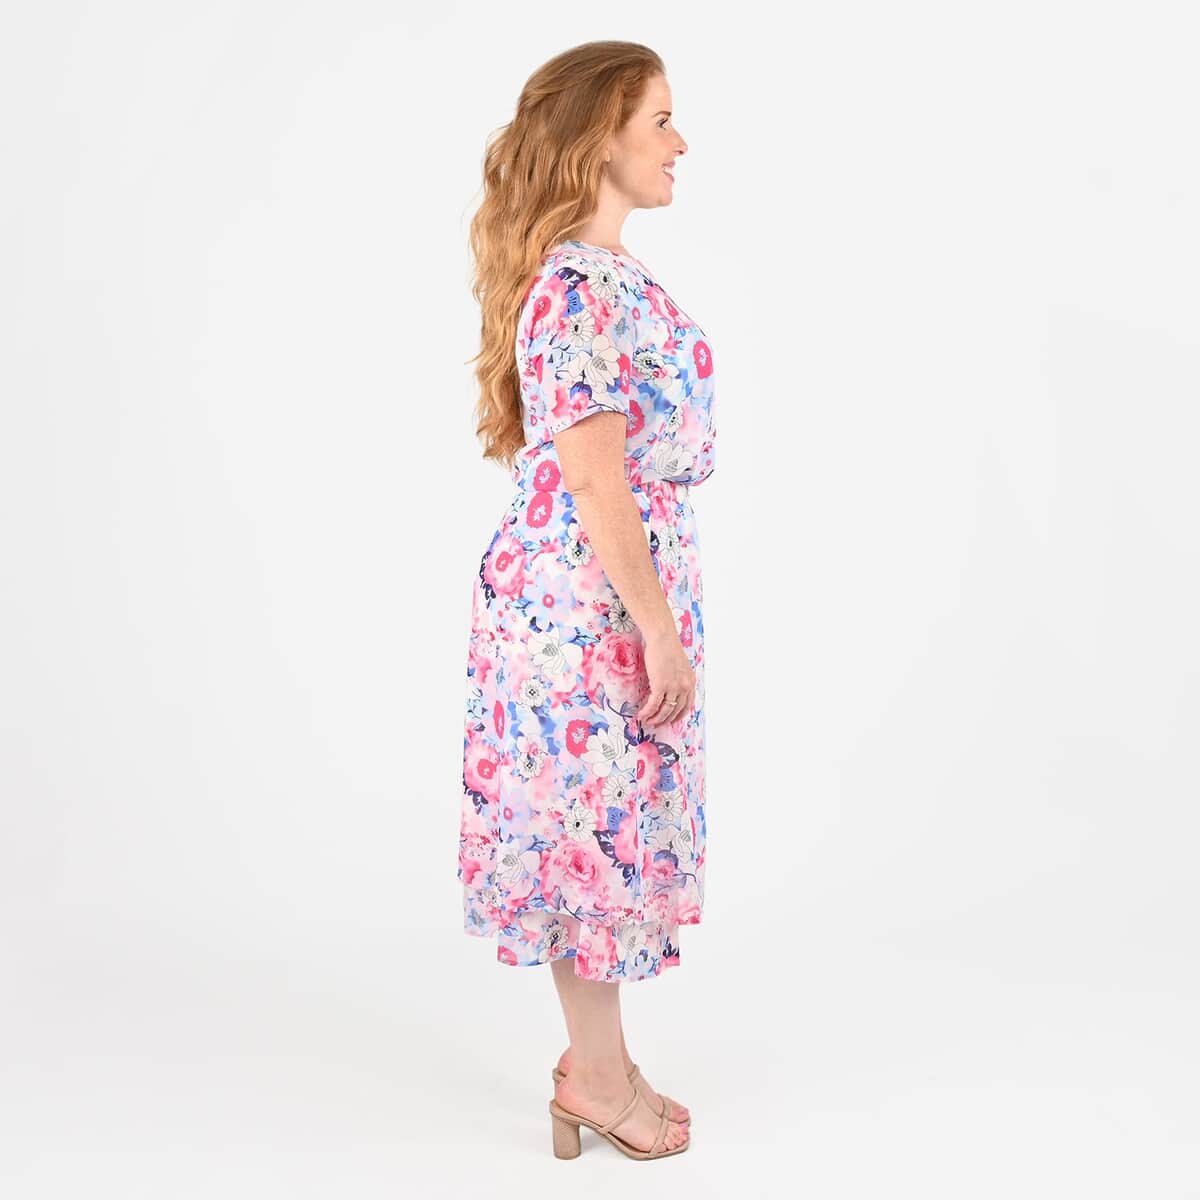 Tamsy Pink Floral 2-piece Chiffon Skirt Set - 1X image number 2